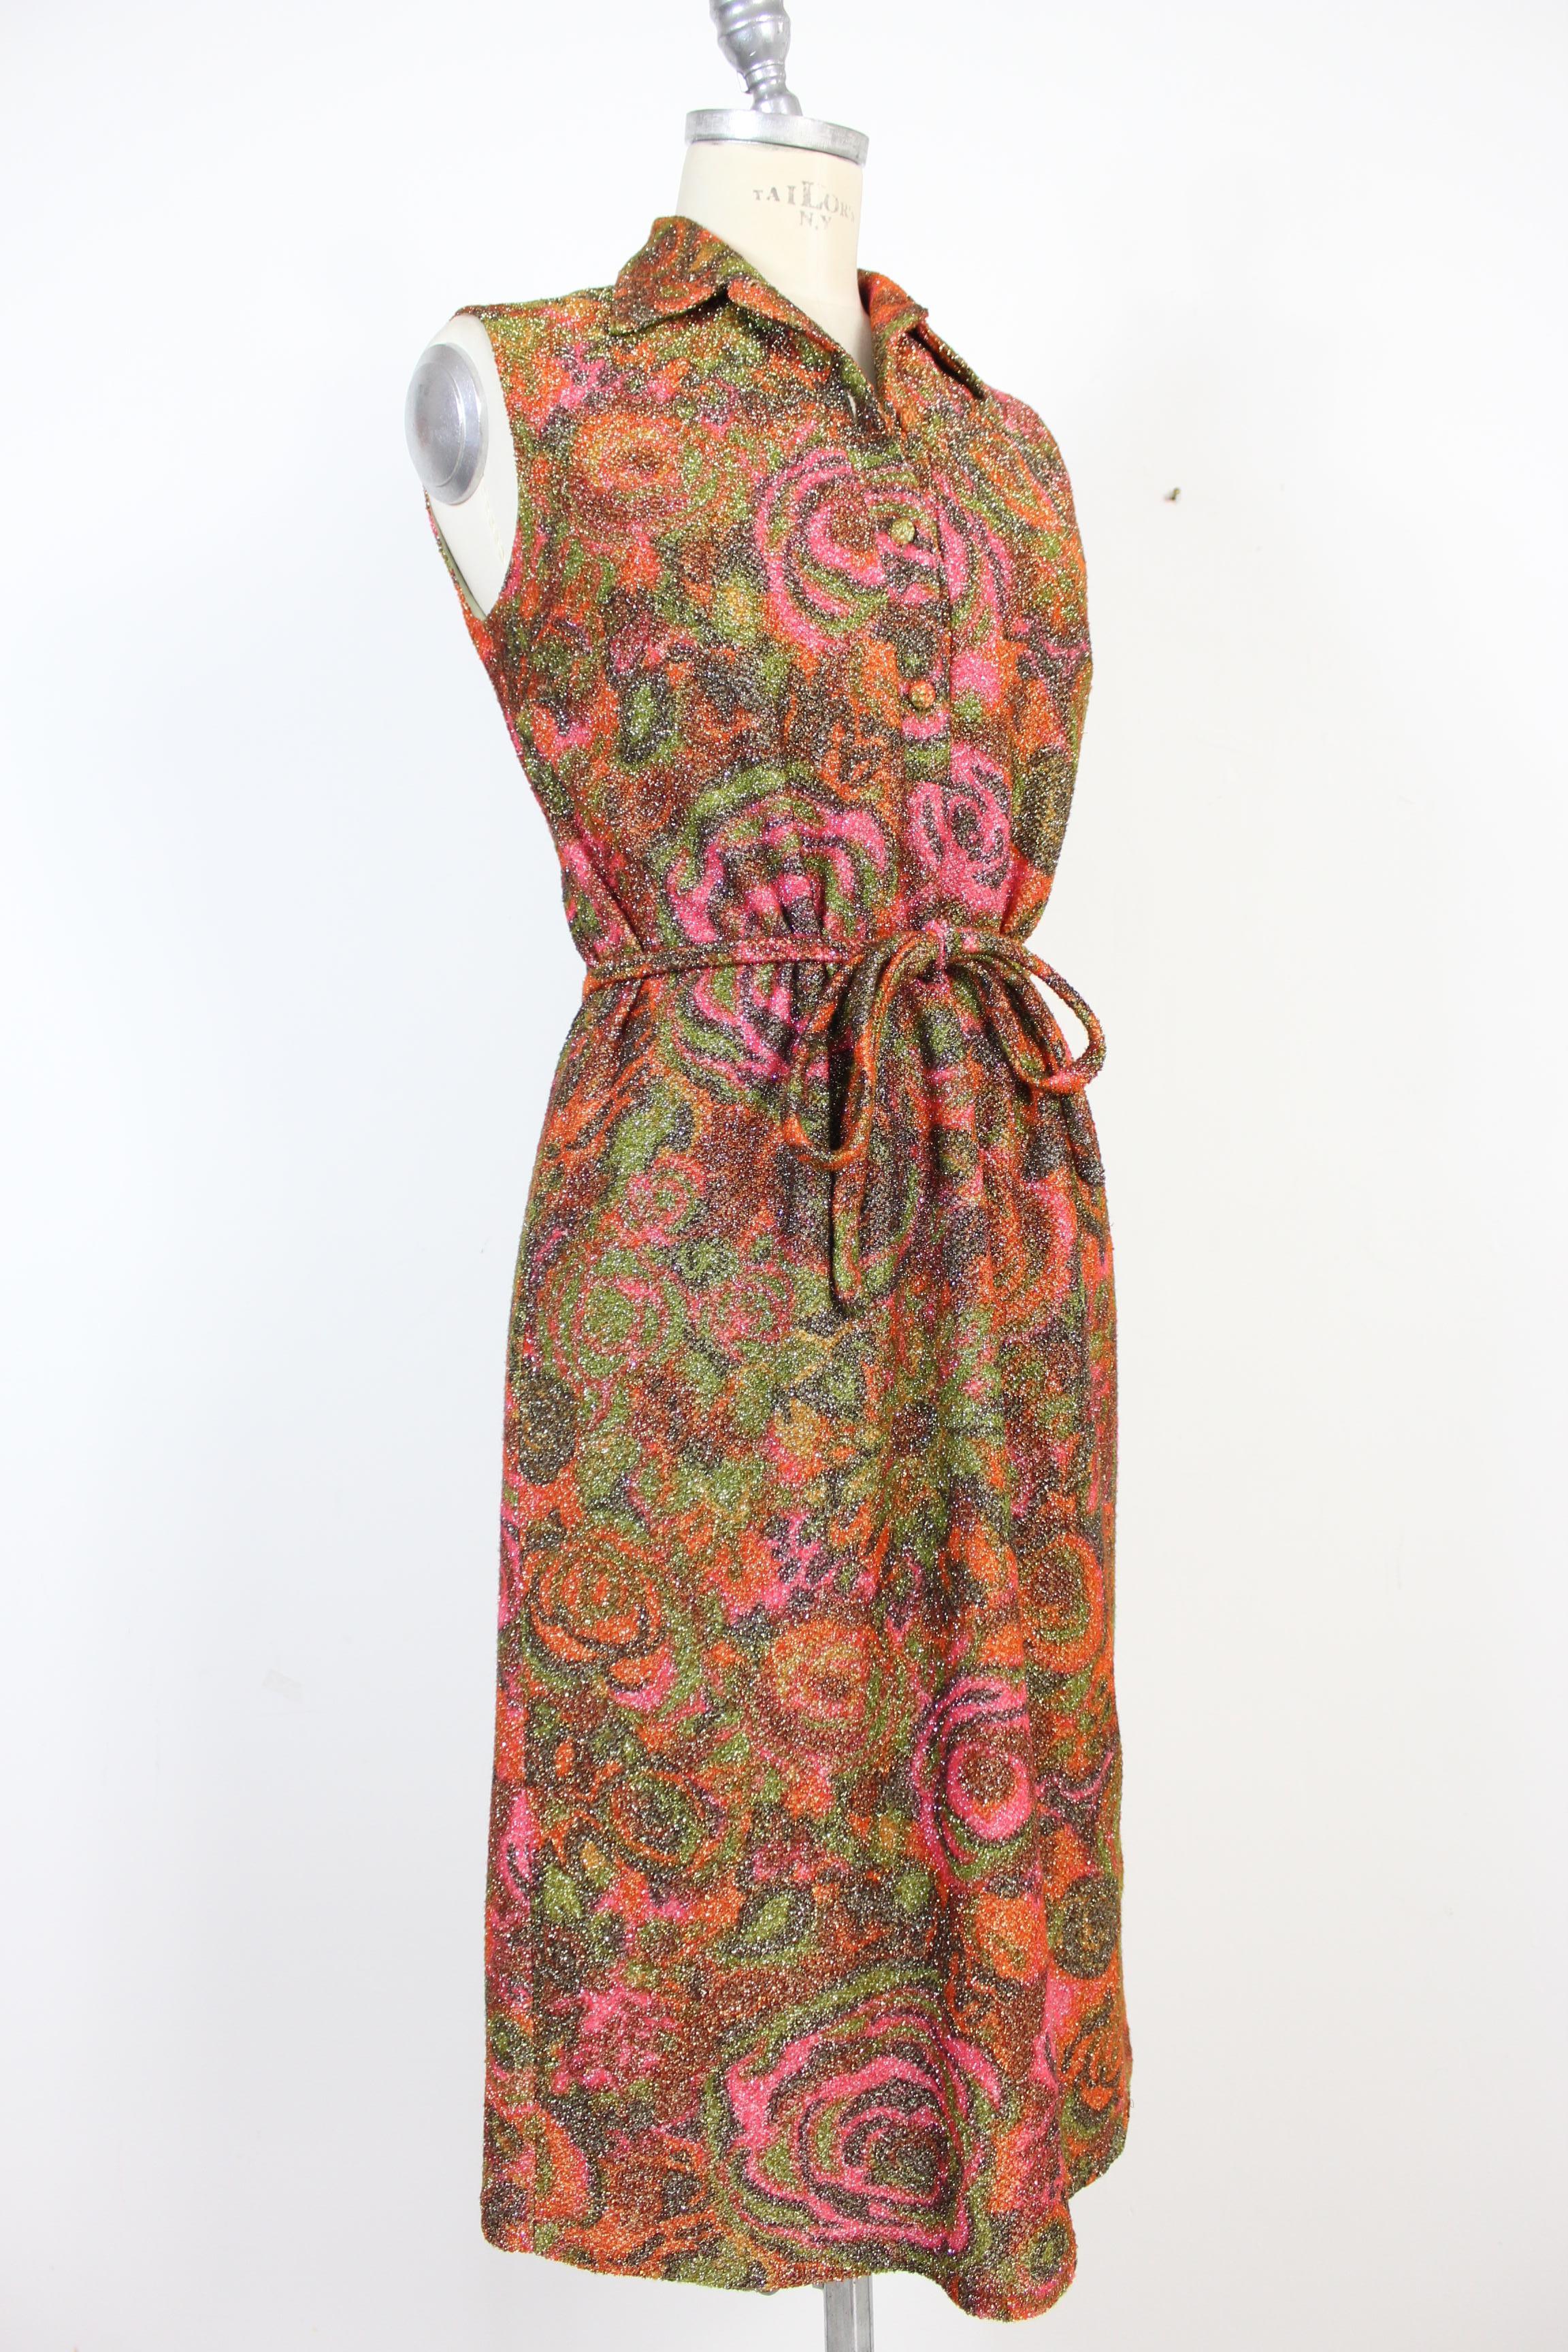 Sorelle Fontana Vintage Dress 1960s Red Lamè Iridescent Wool Floral In Excellent Condition In Brindisi, Bt